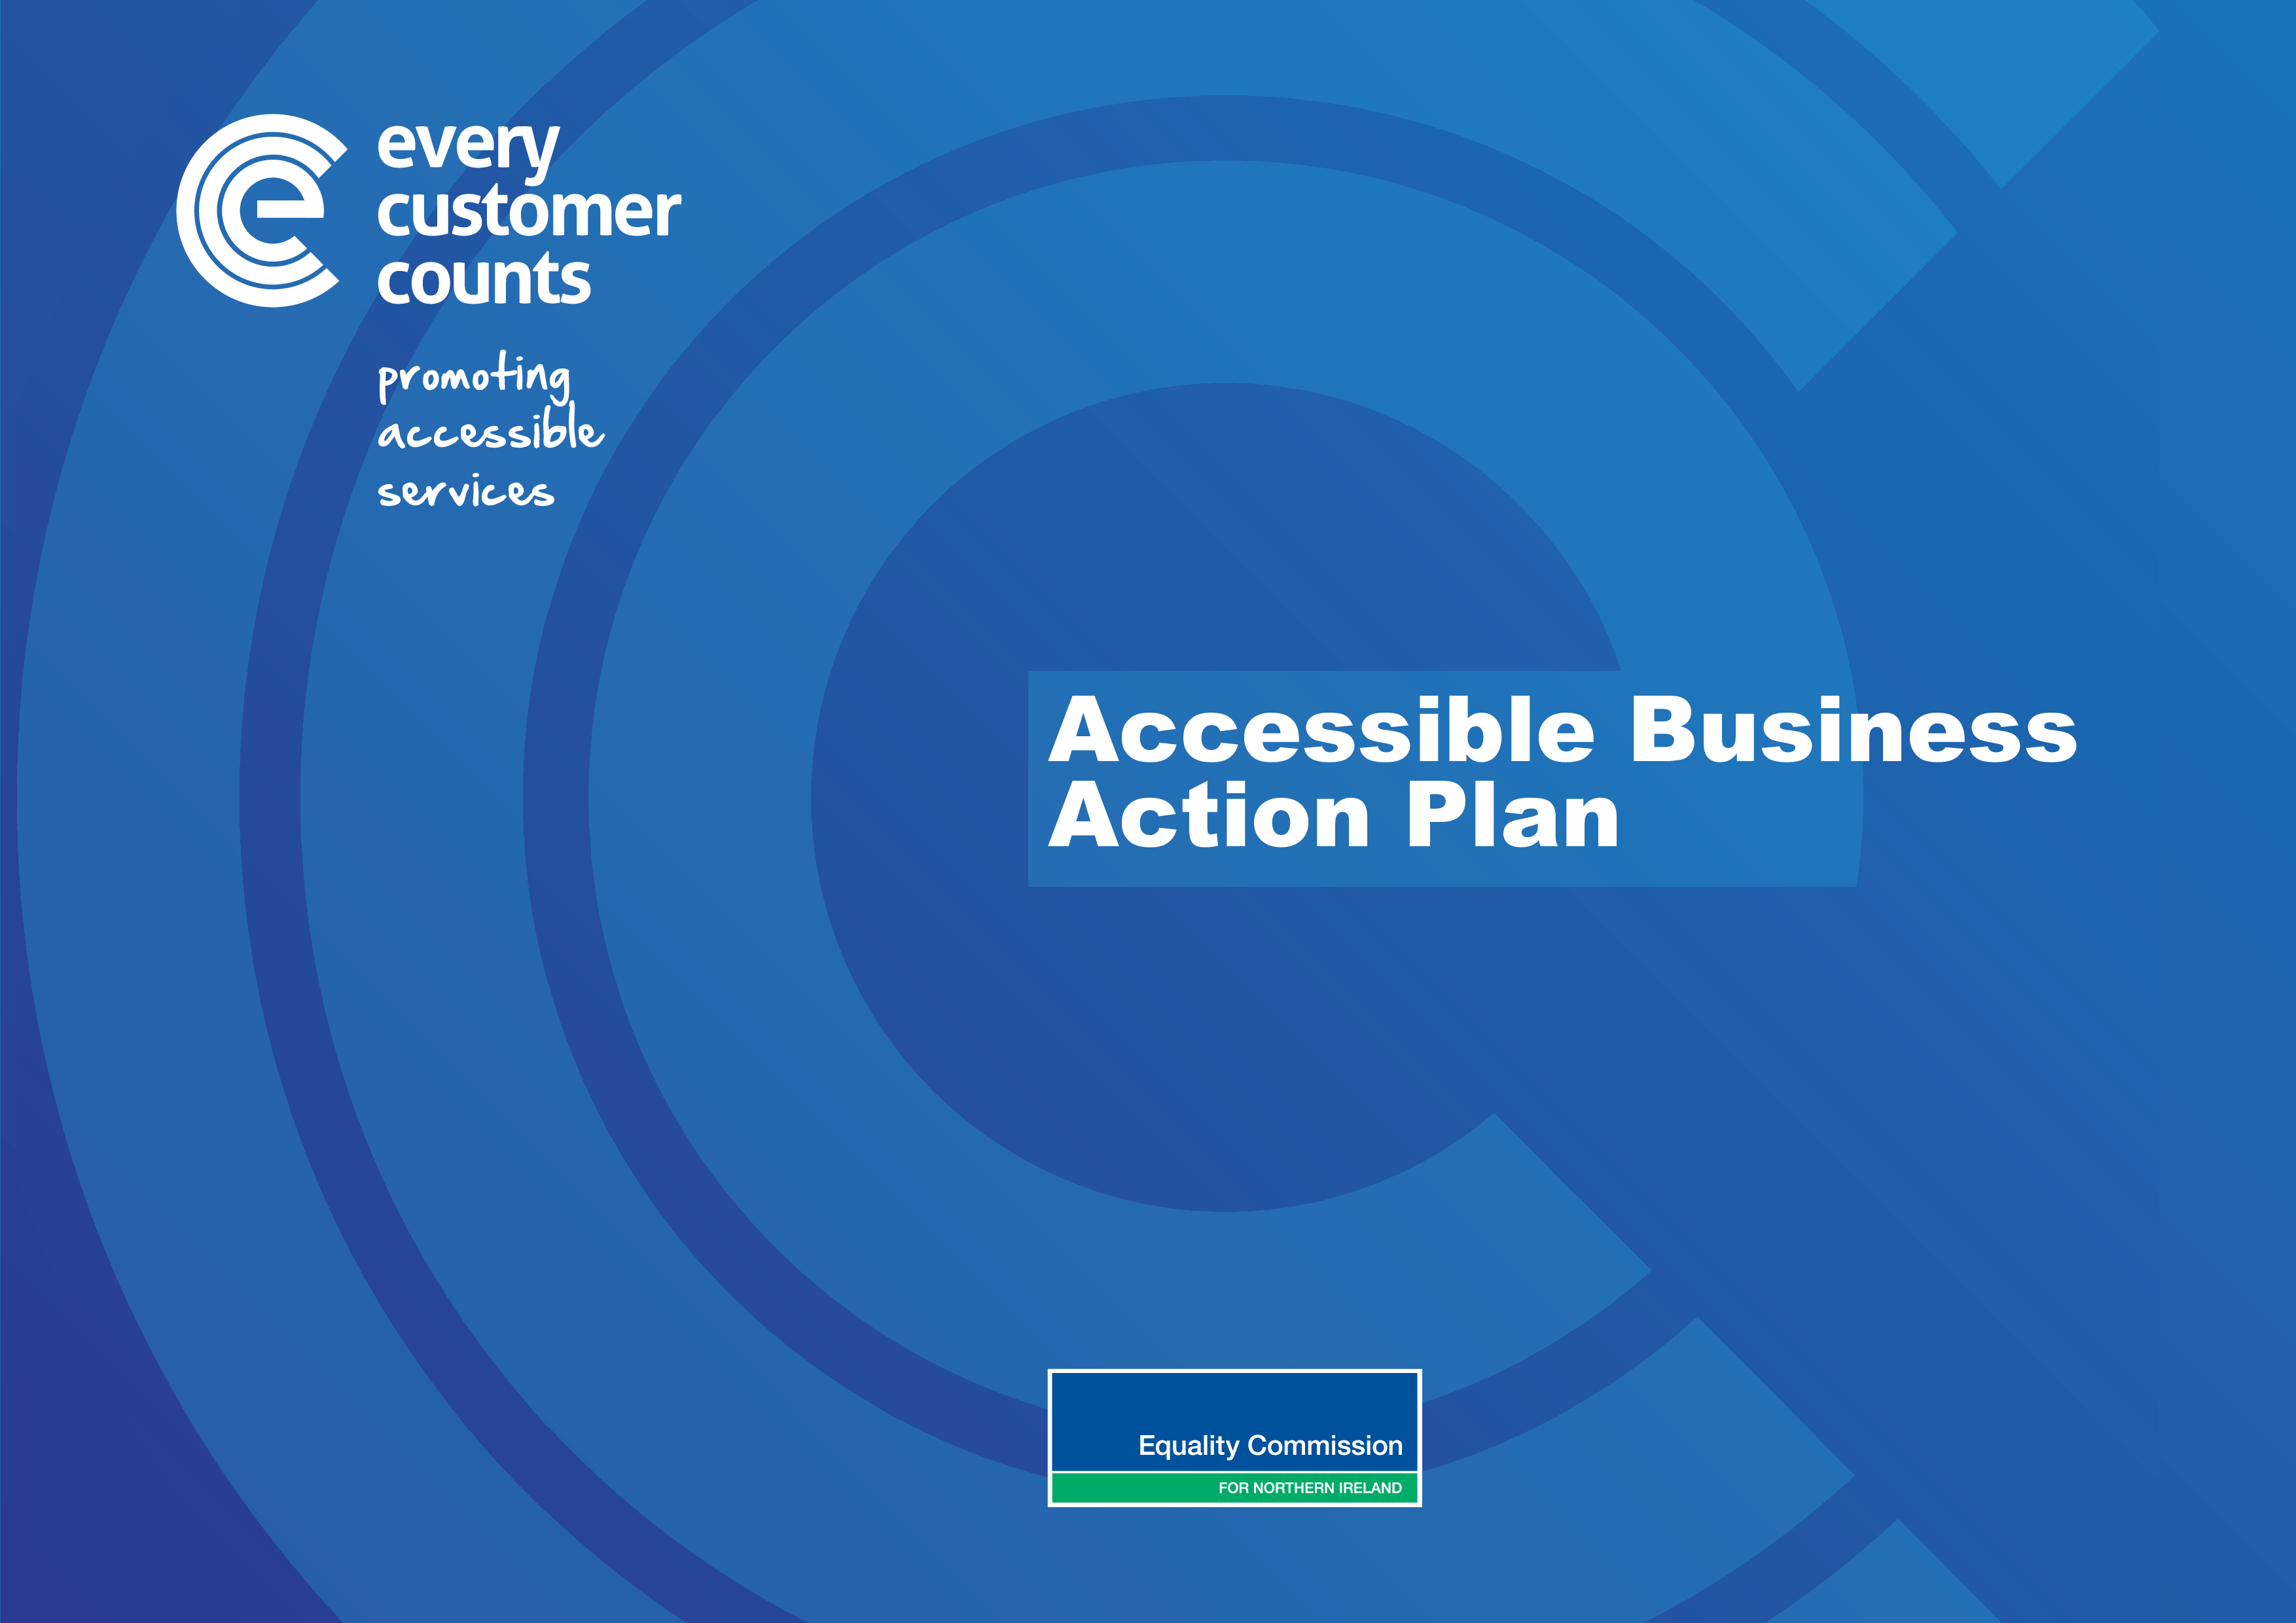 Business Action Plan 模板